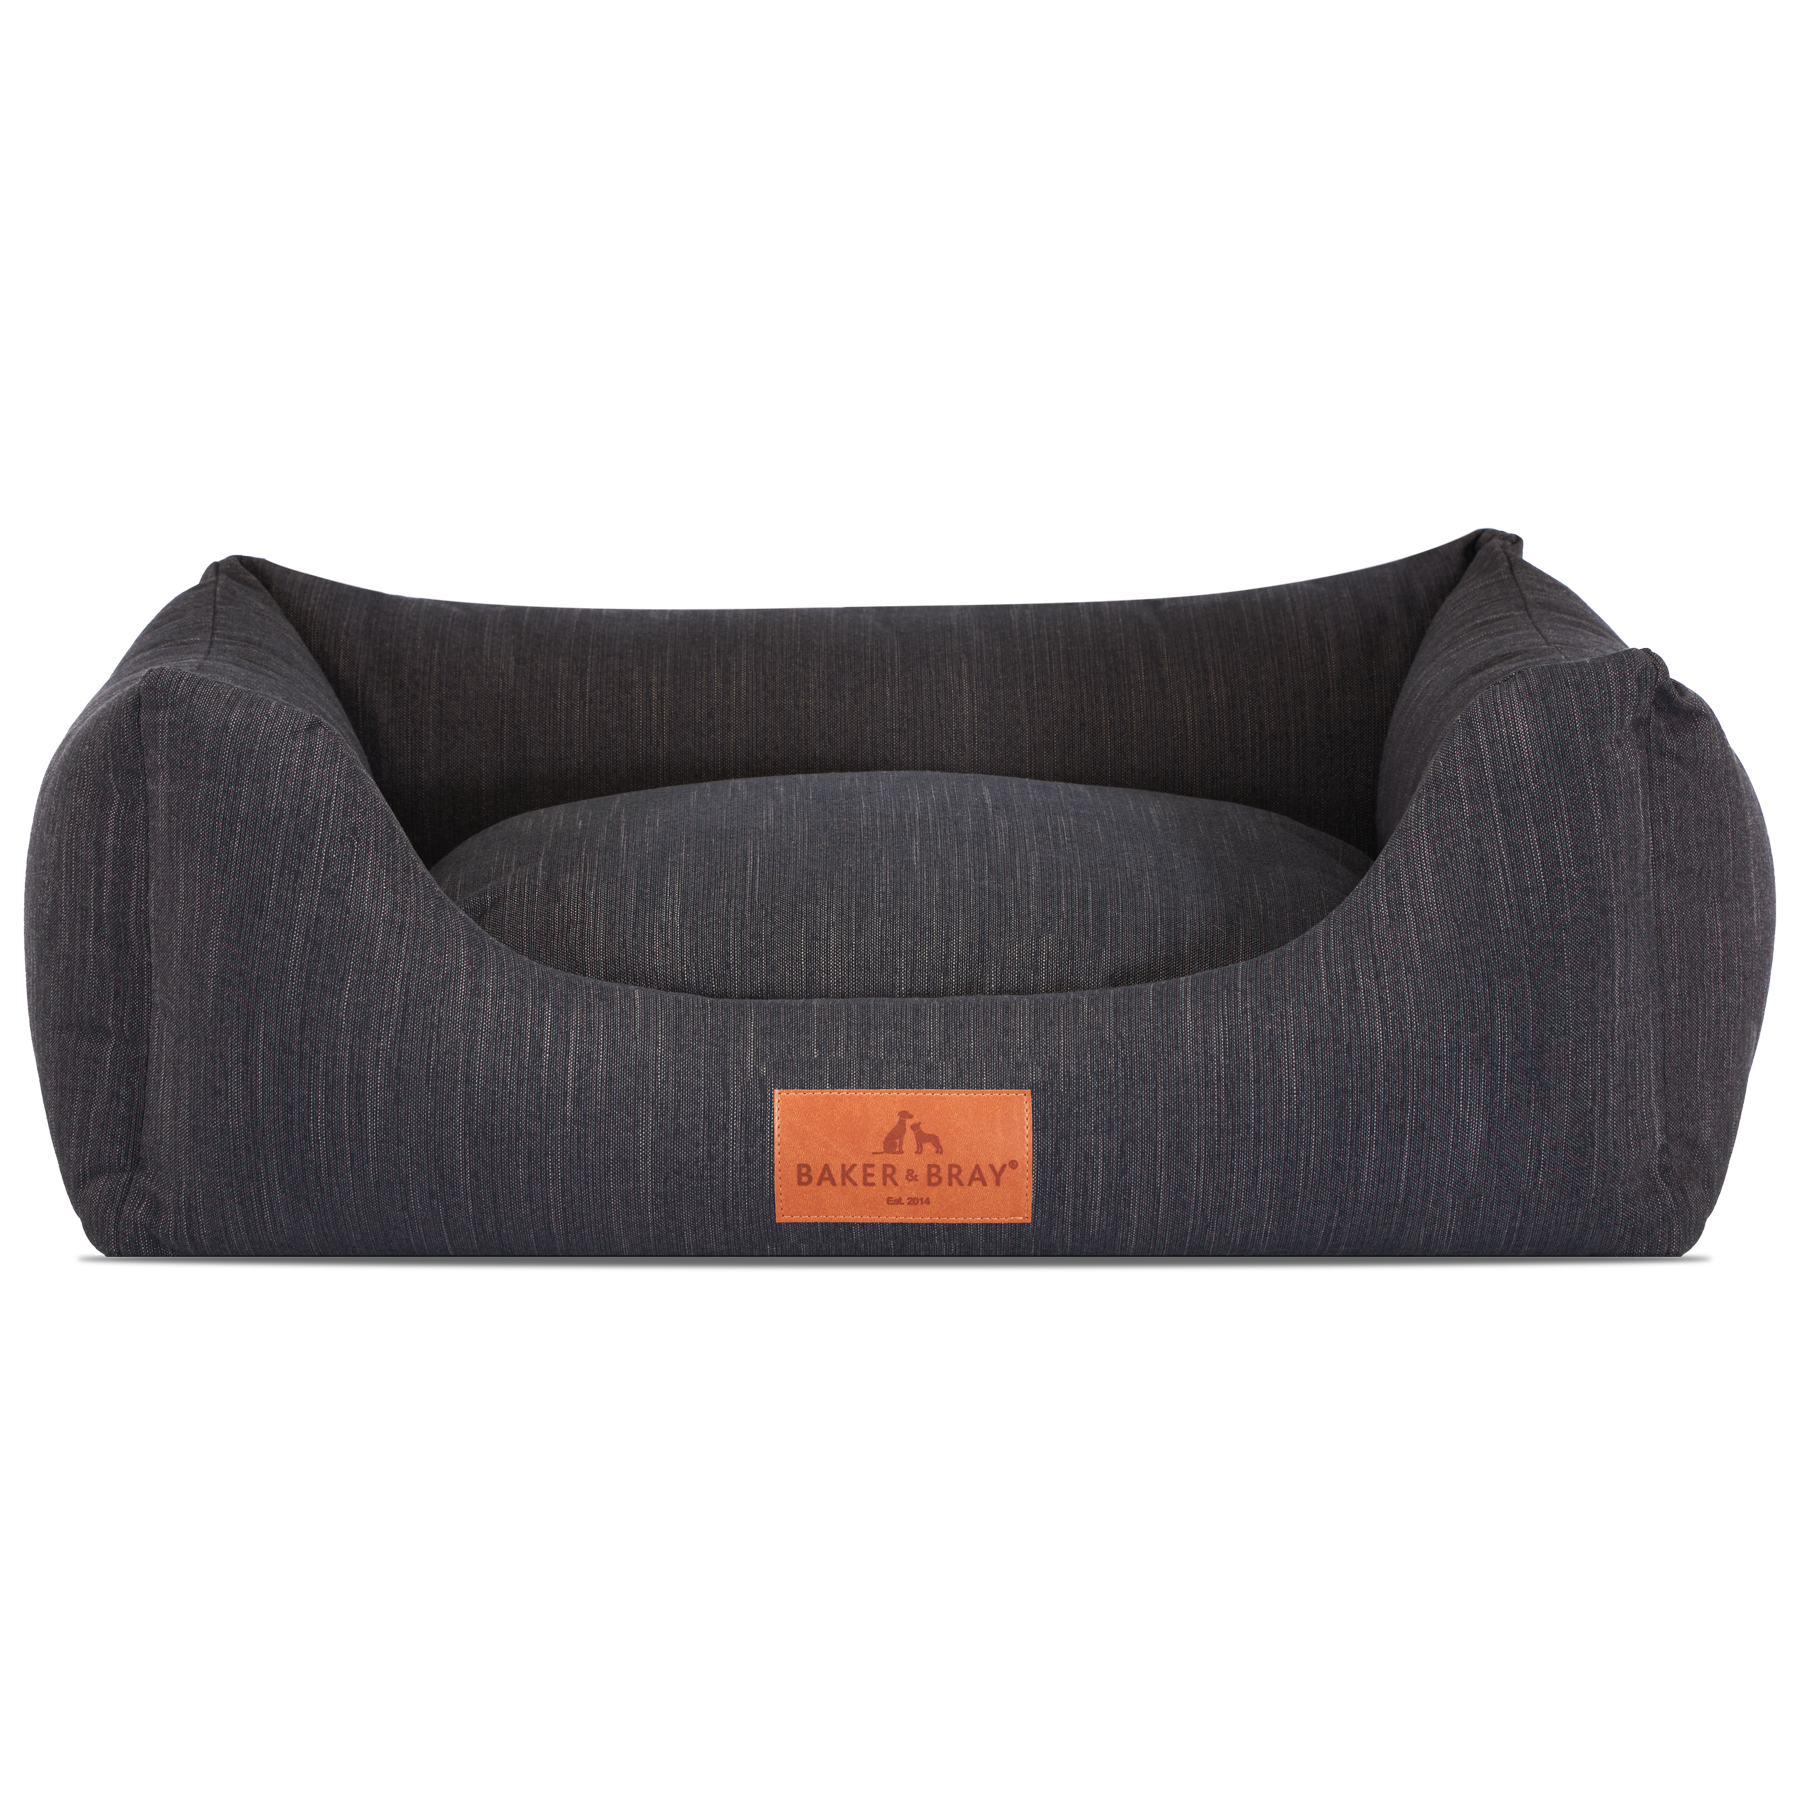 Interchangeable Spare Covers For Eco Luxe Dog Bed - Baker & Bray